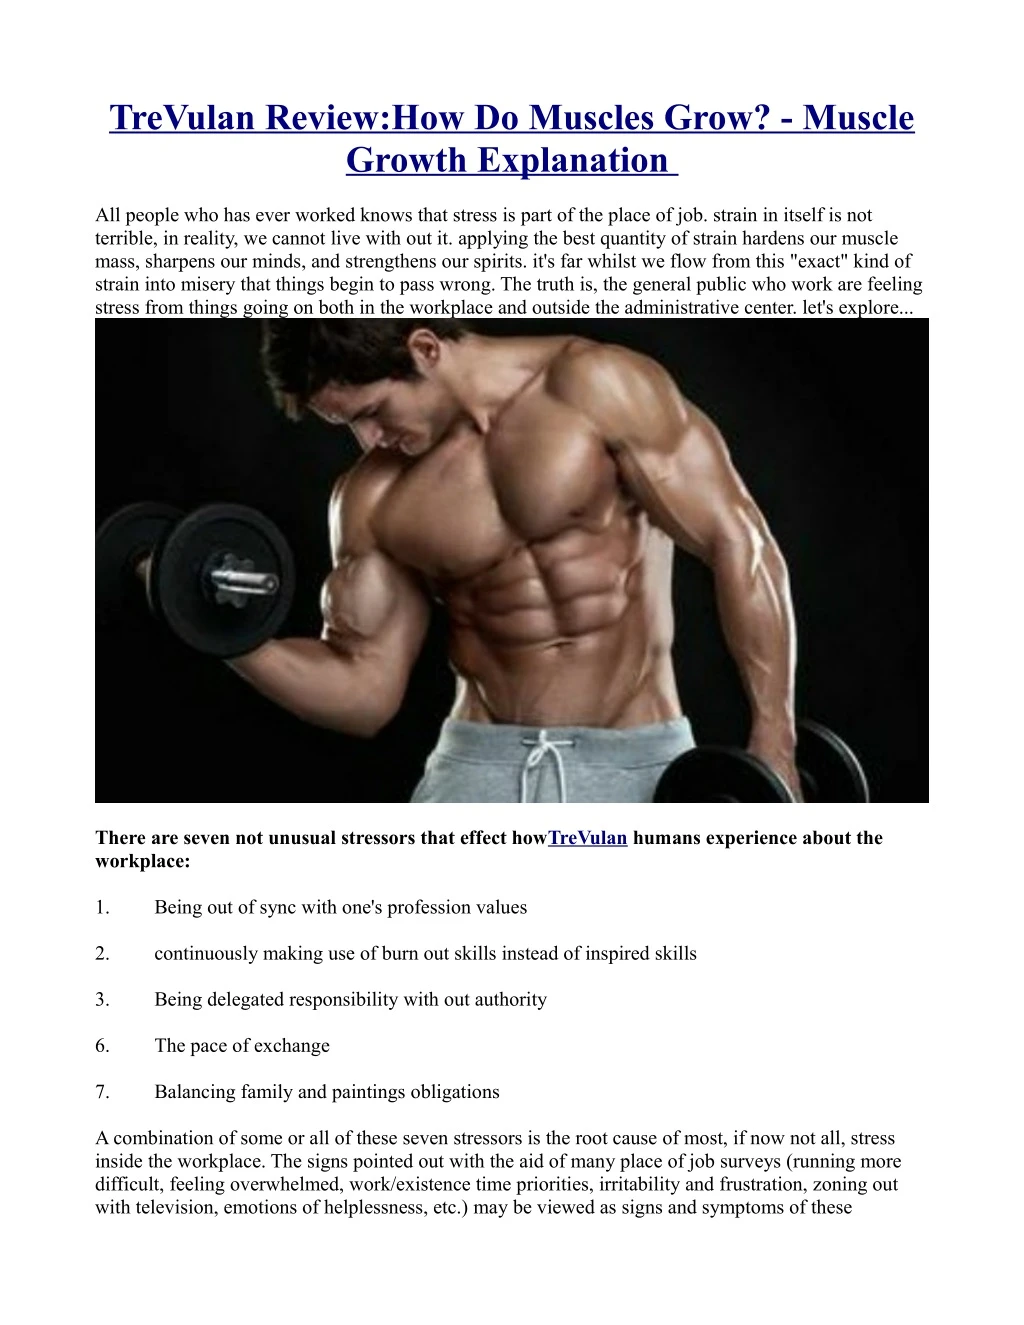 trevulan review how do muscles grow muscle growth